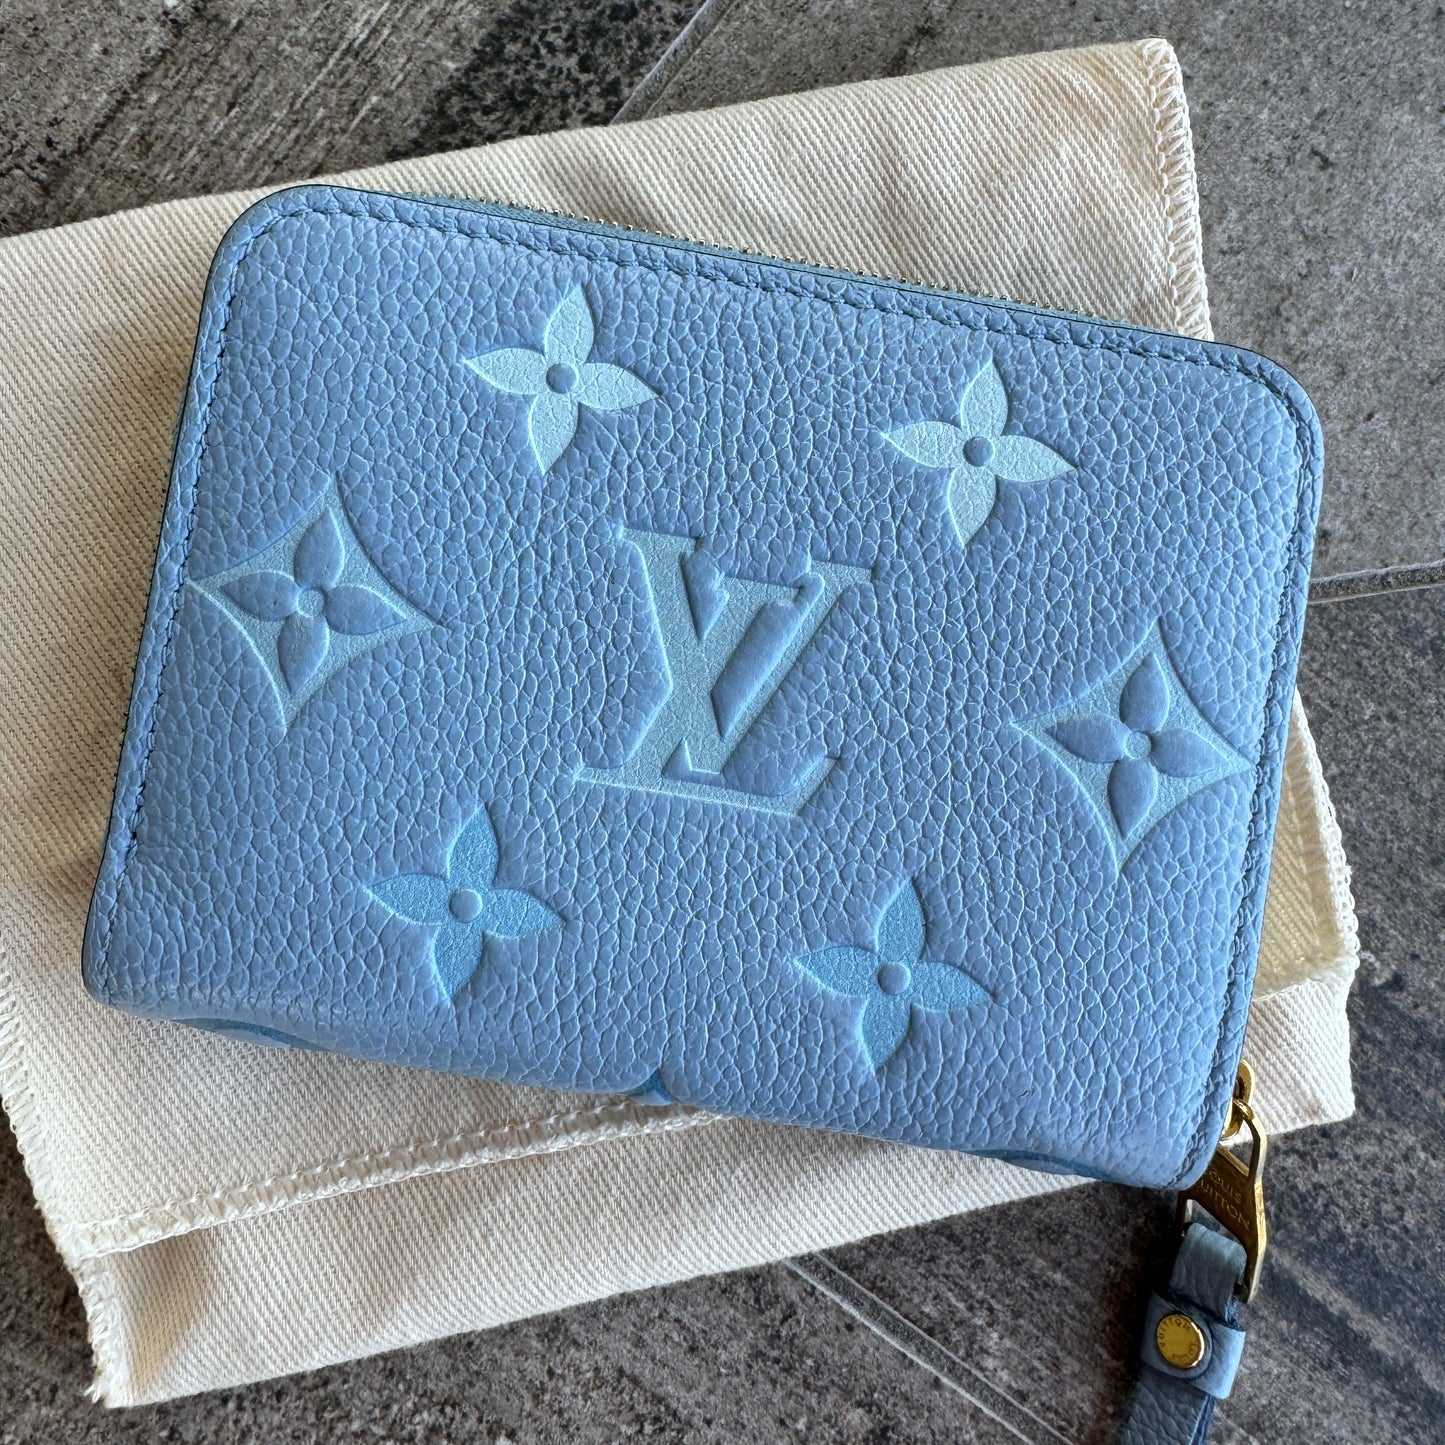 Louis Vuitton Monogram By the Pool Compact Zippy Wallet